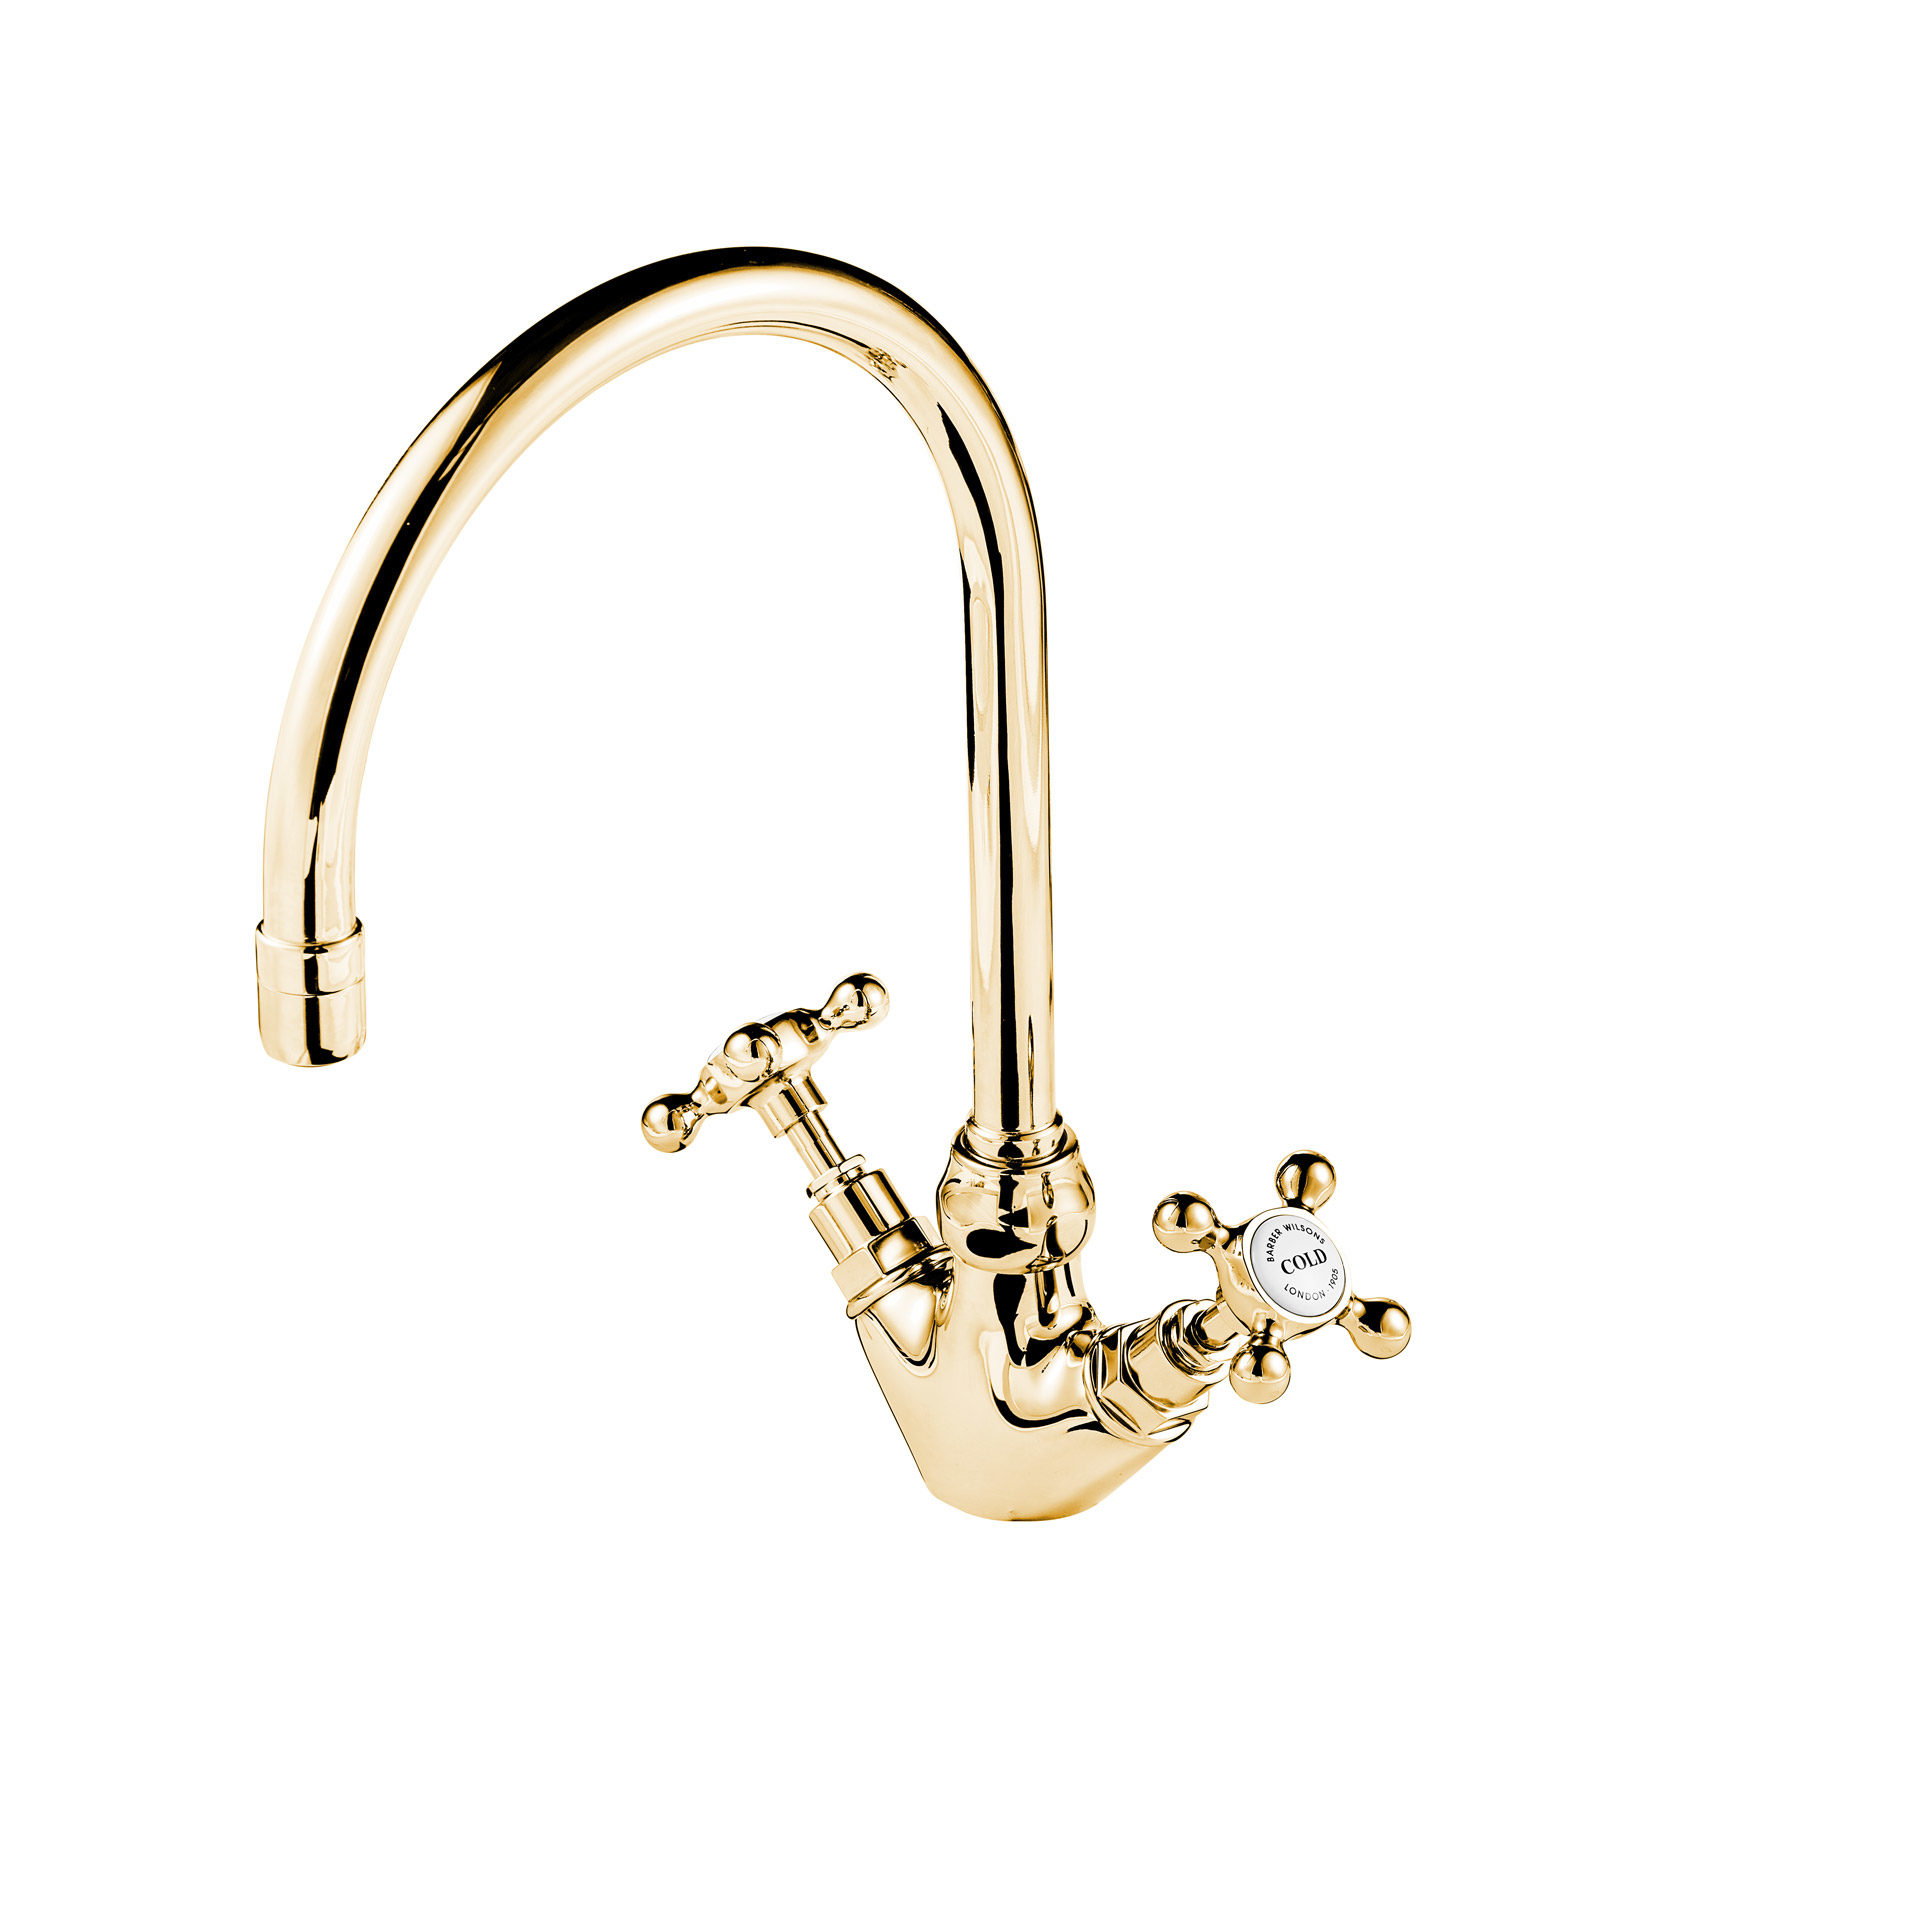 Single hole deck mounted kitchen tap mixer with a swivel neck in polished bronze